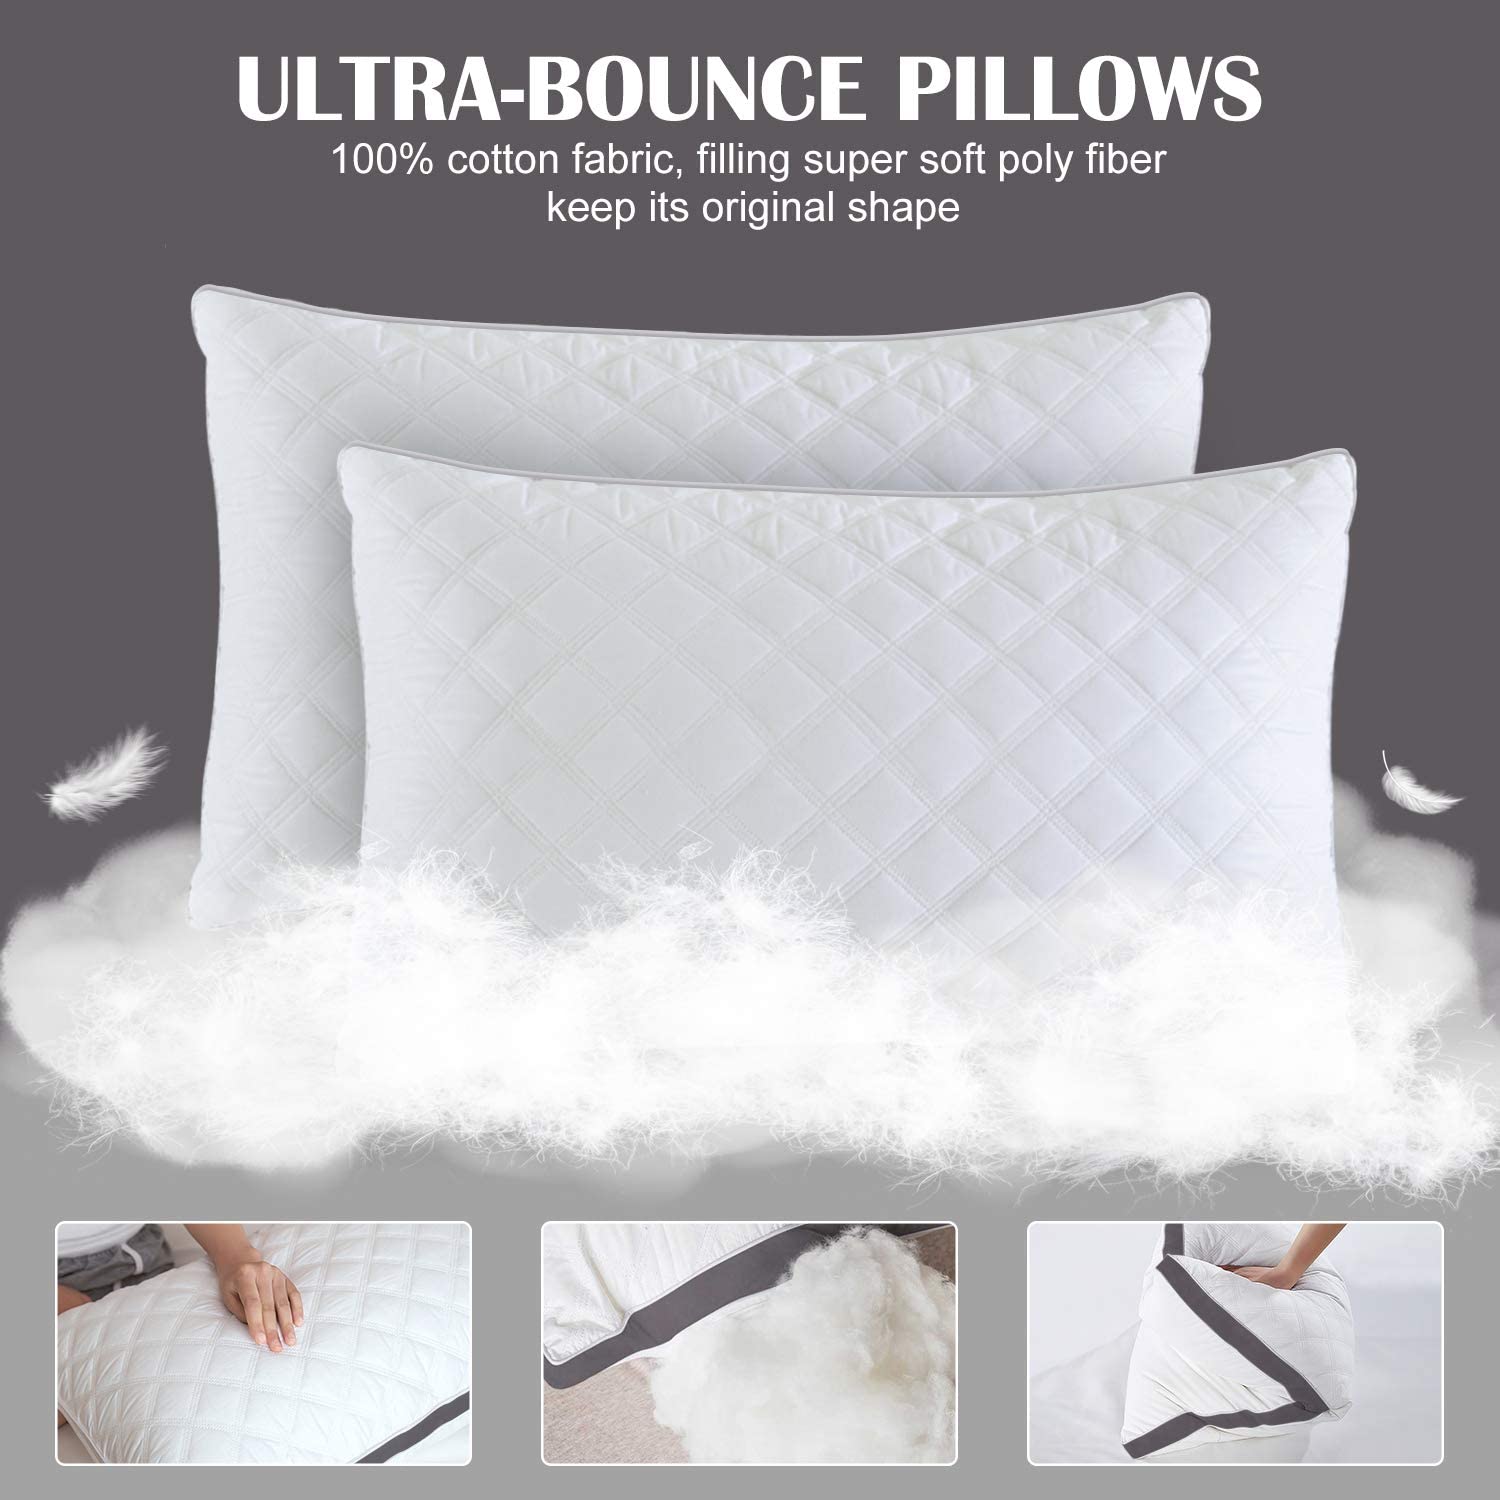 Sleeping Ultrabounce Pillows Pack of 2 - USTAD HOME